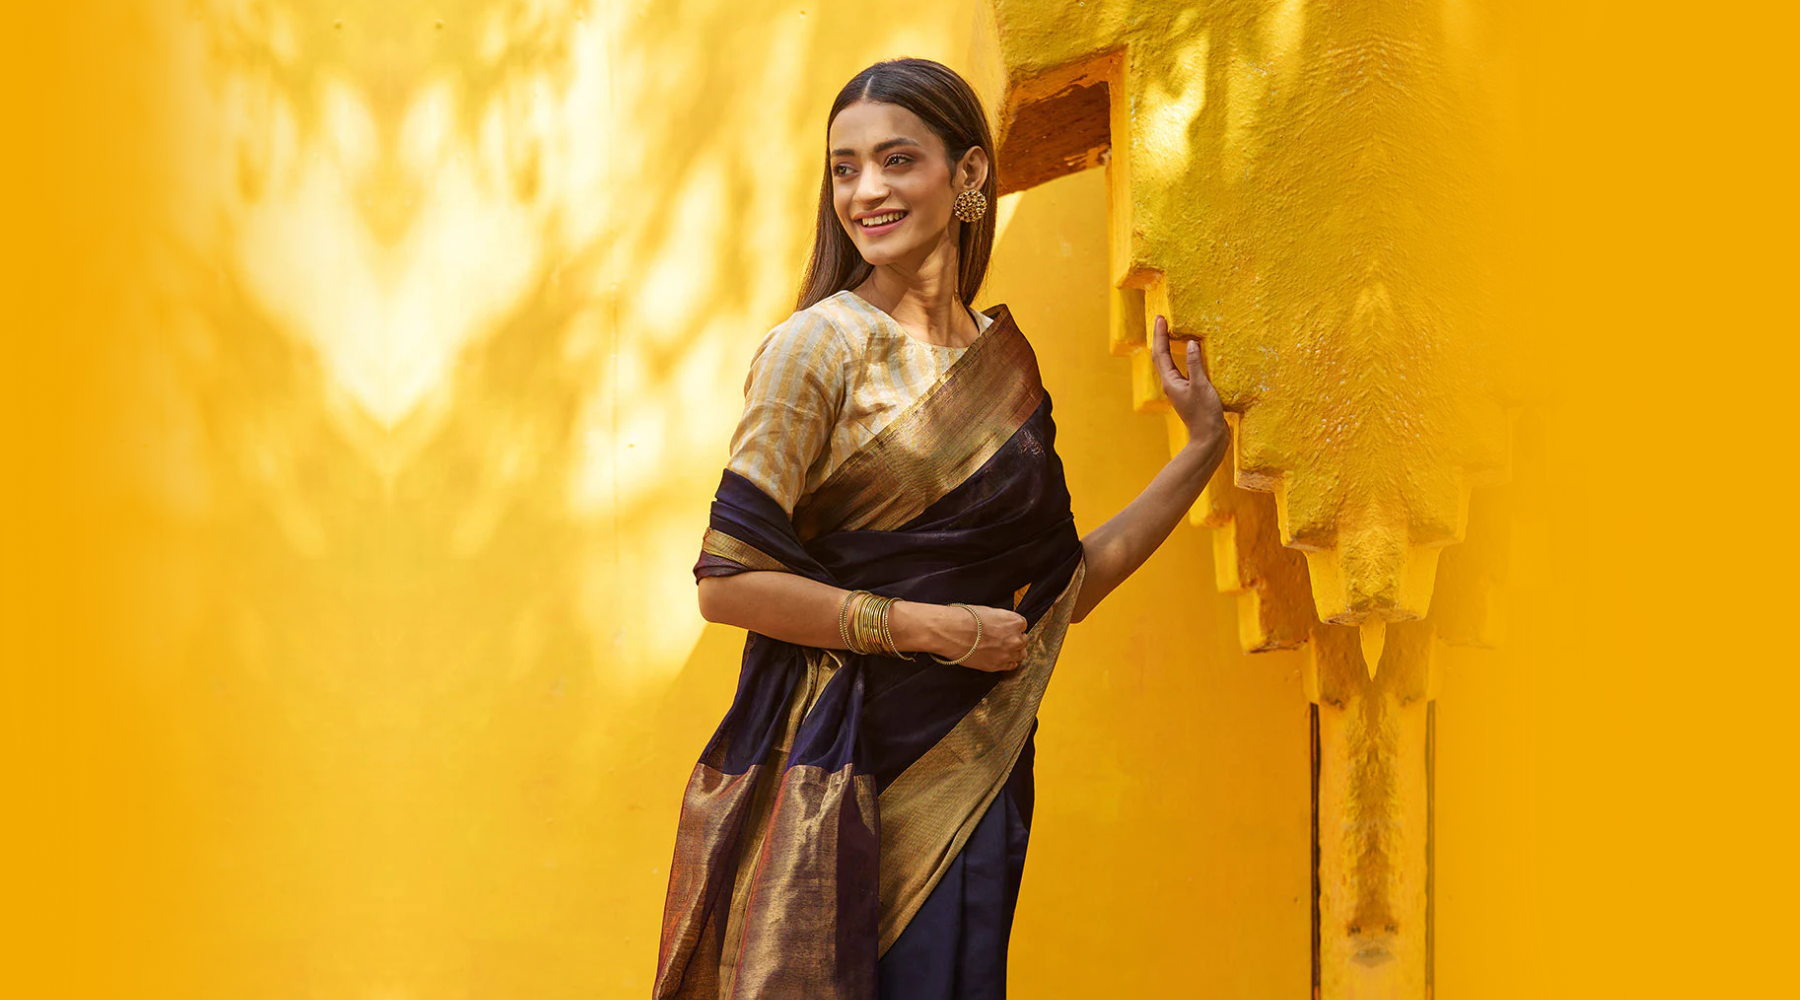 Here’s_taking_a_minute_to_sit_back_and_appreciate_the_scintillating_beauty_of_Indian_weaves_and_textiles._WeaverStory